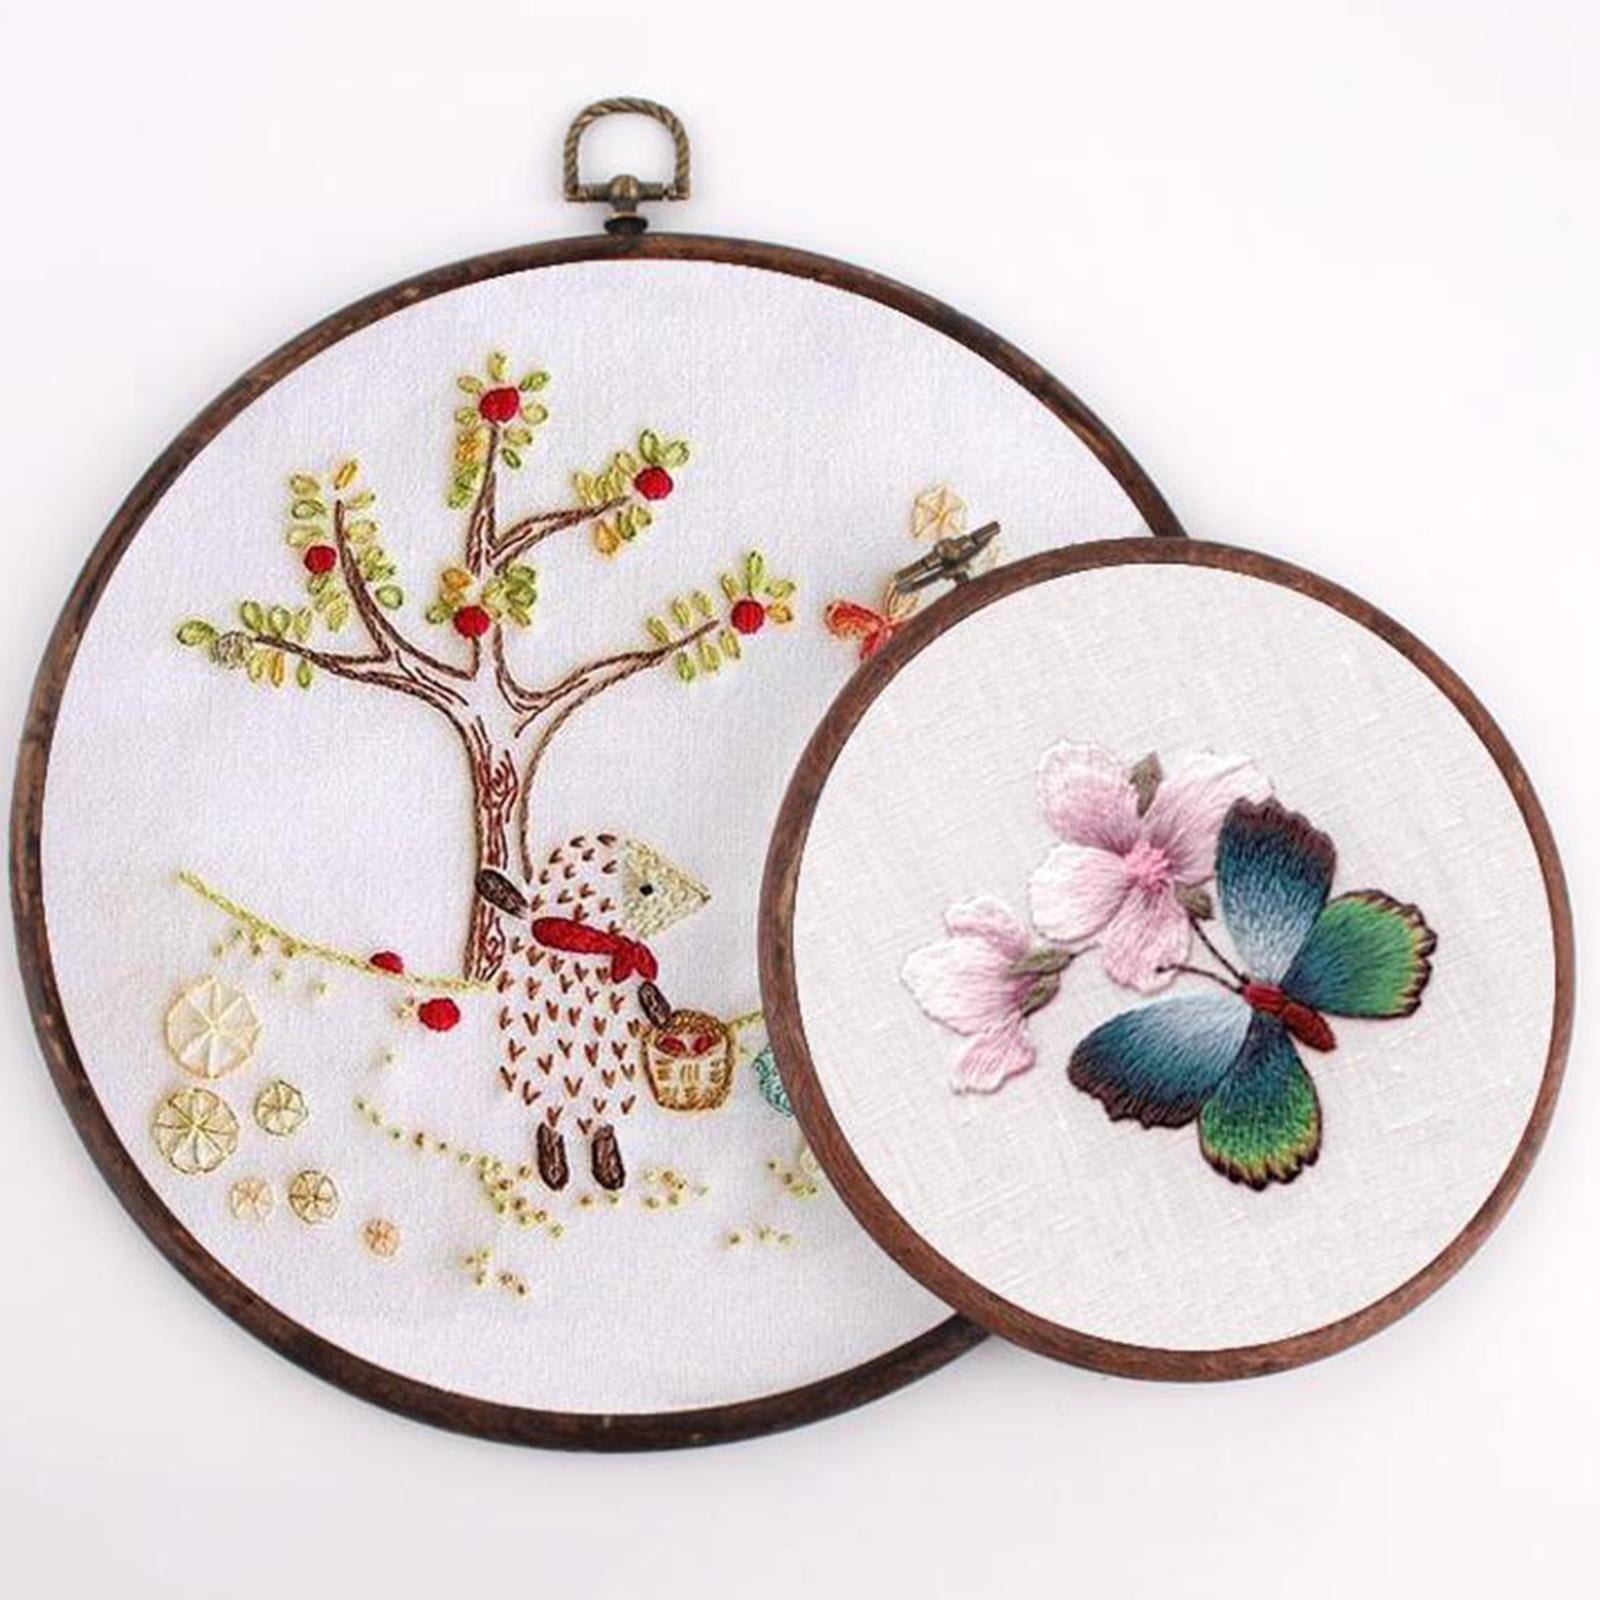 Sew Easy—Stitch Hoop Counted Cross Stitch Kit - Needlework